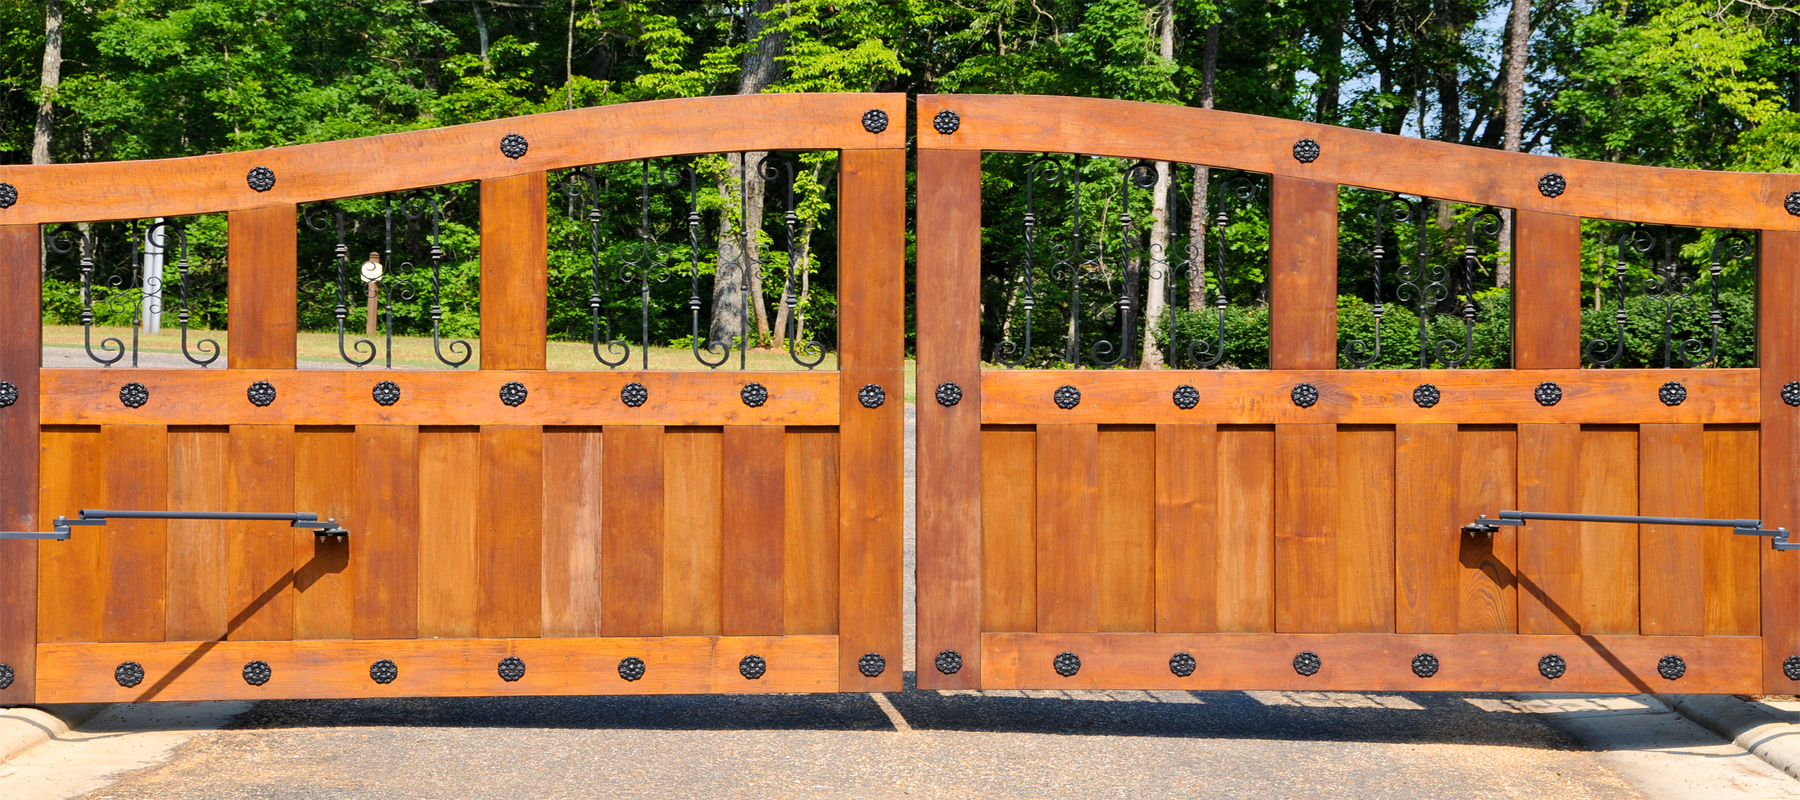 Wood Gate Installation Prices [2022]: How Much Does a Wood Gate Cost? -  CostOwl.com